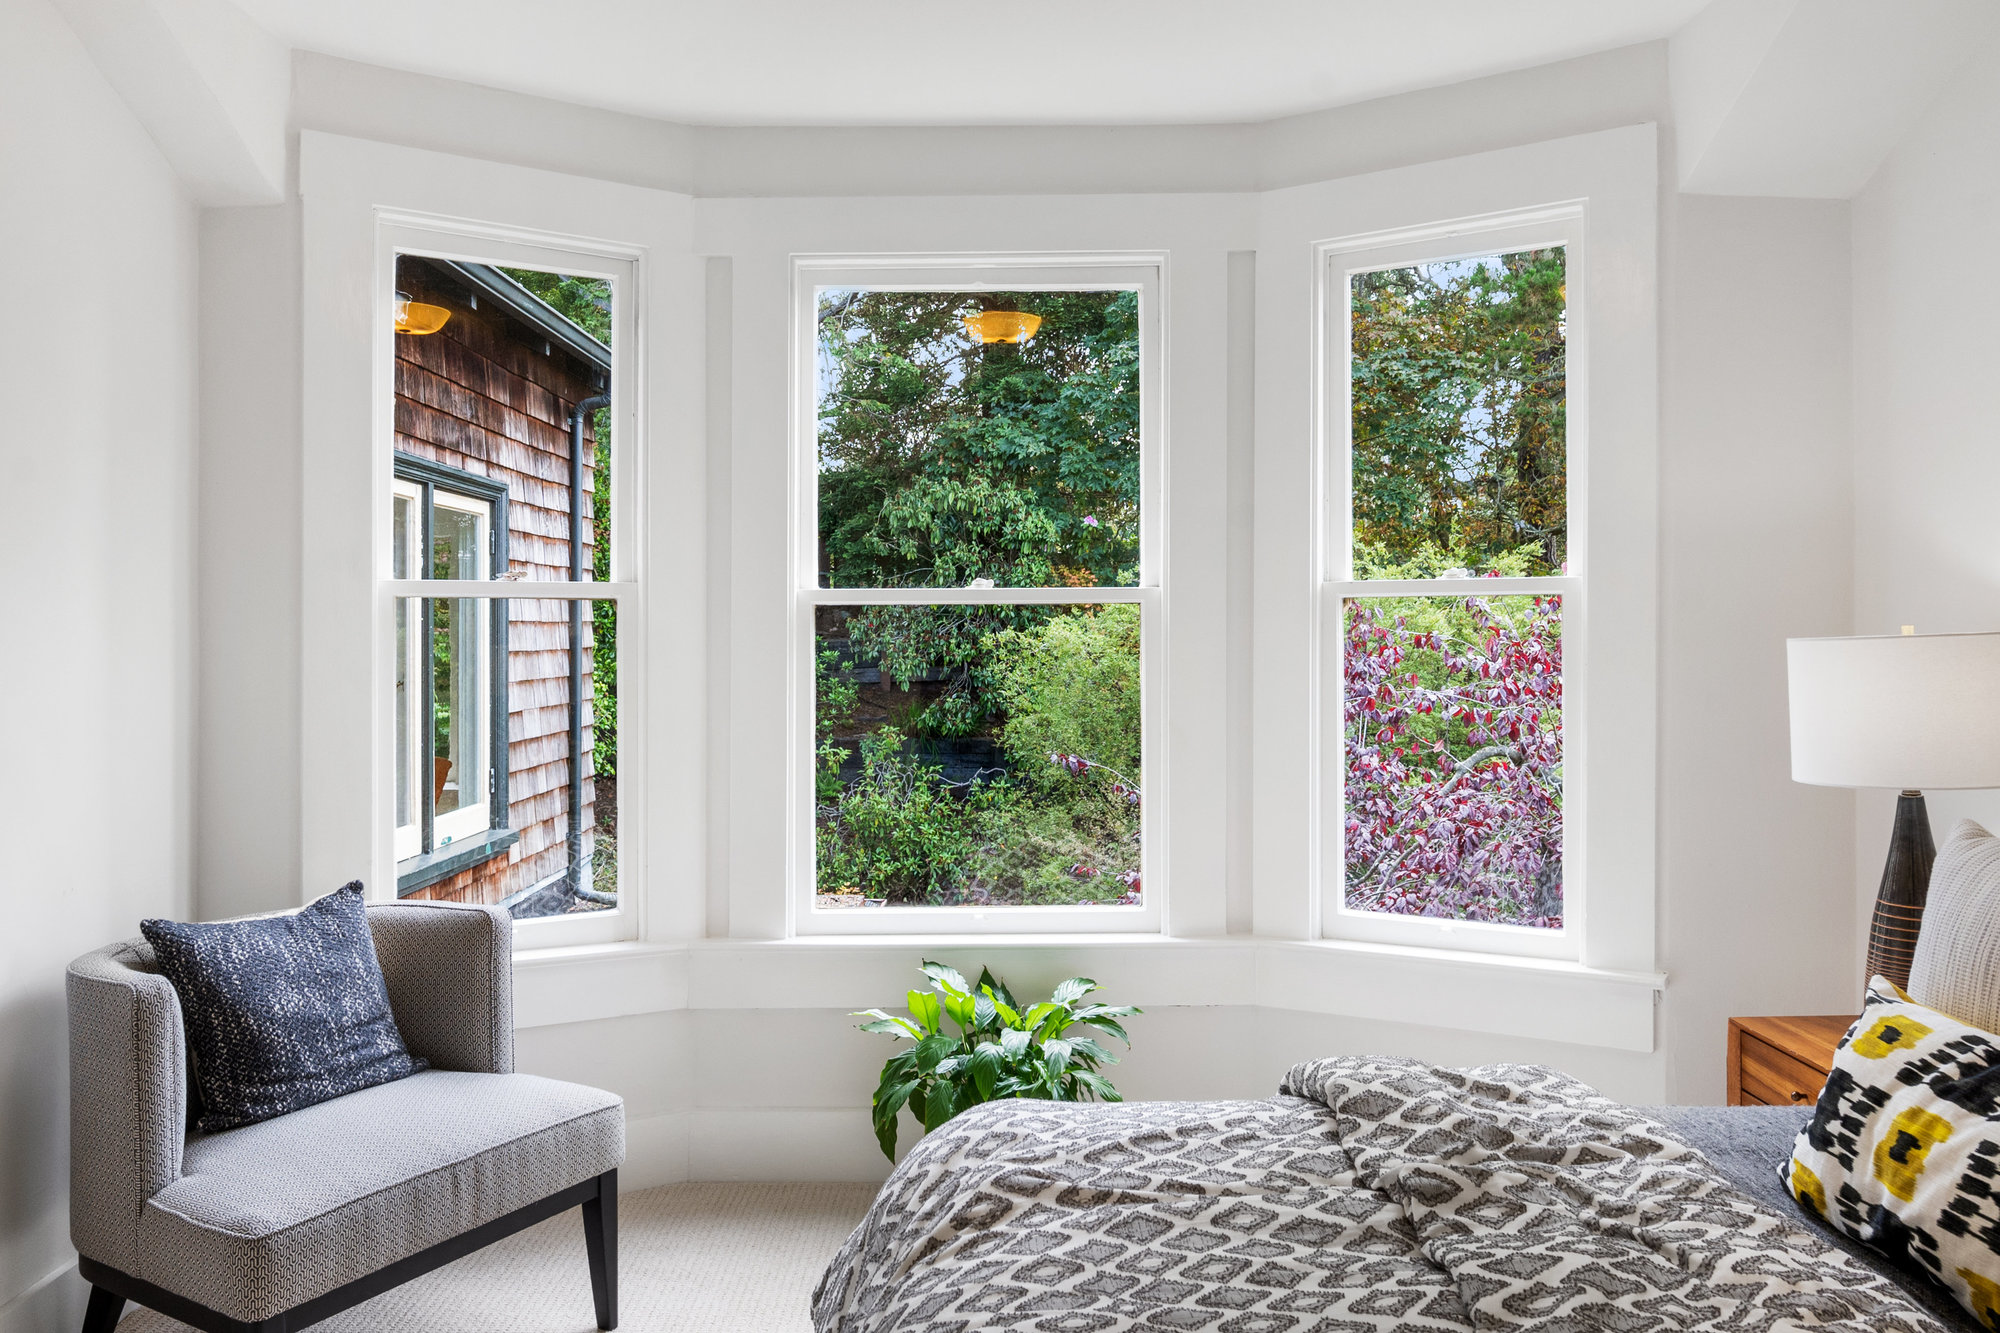 Property Photo: Close-up view of a sitting area and large bay window with a garden beyond